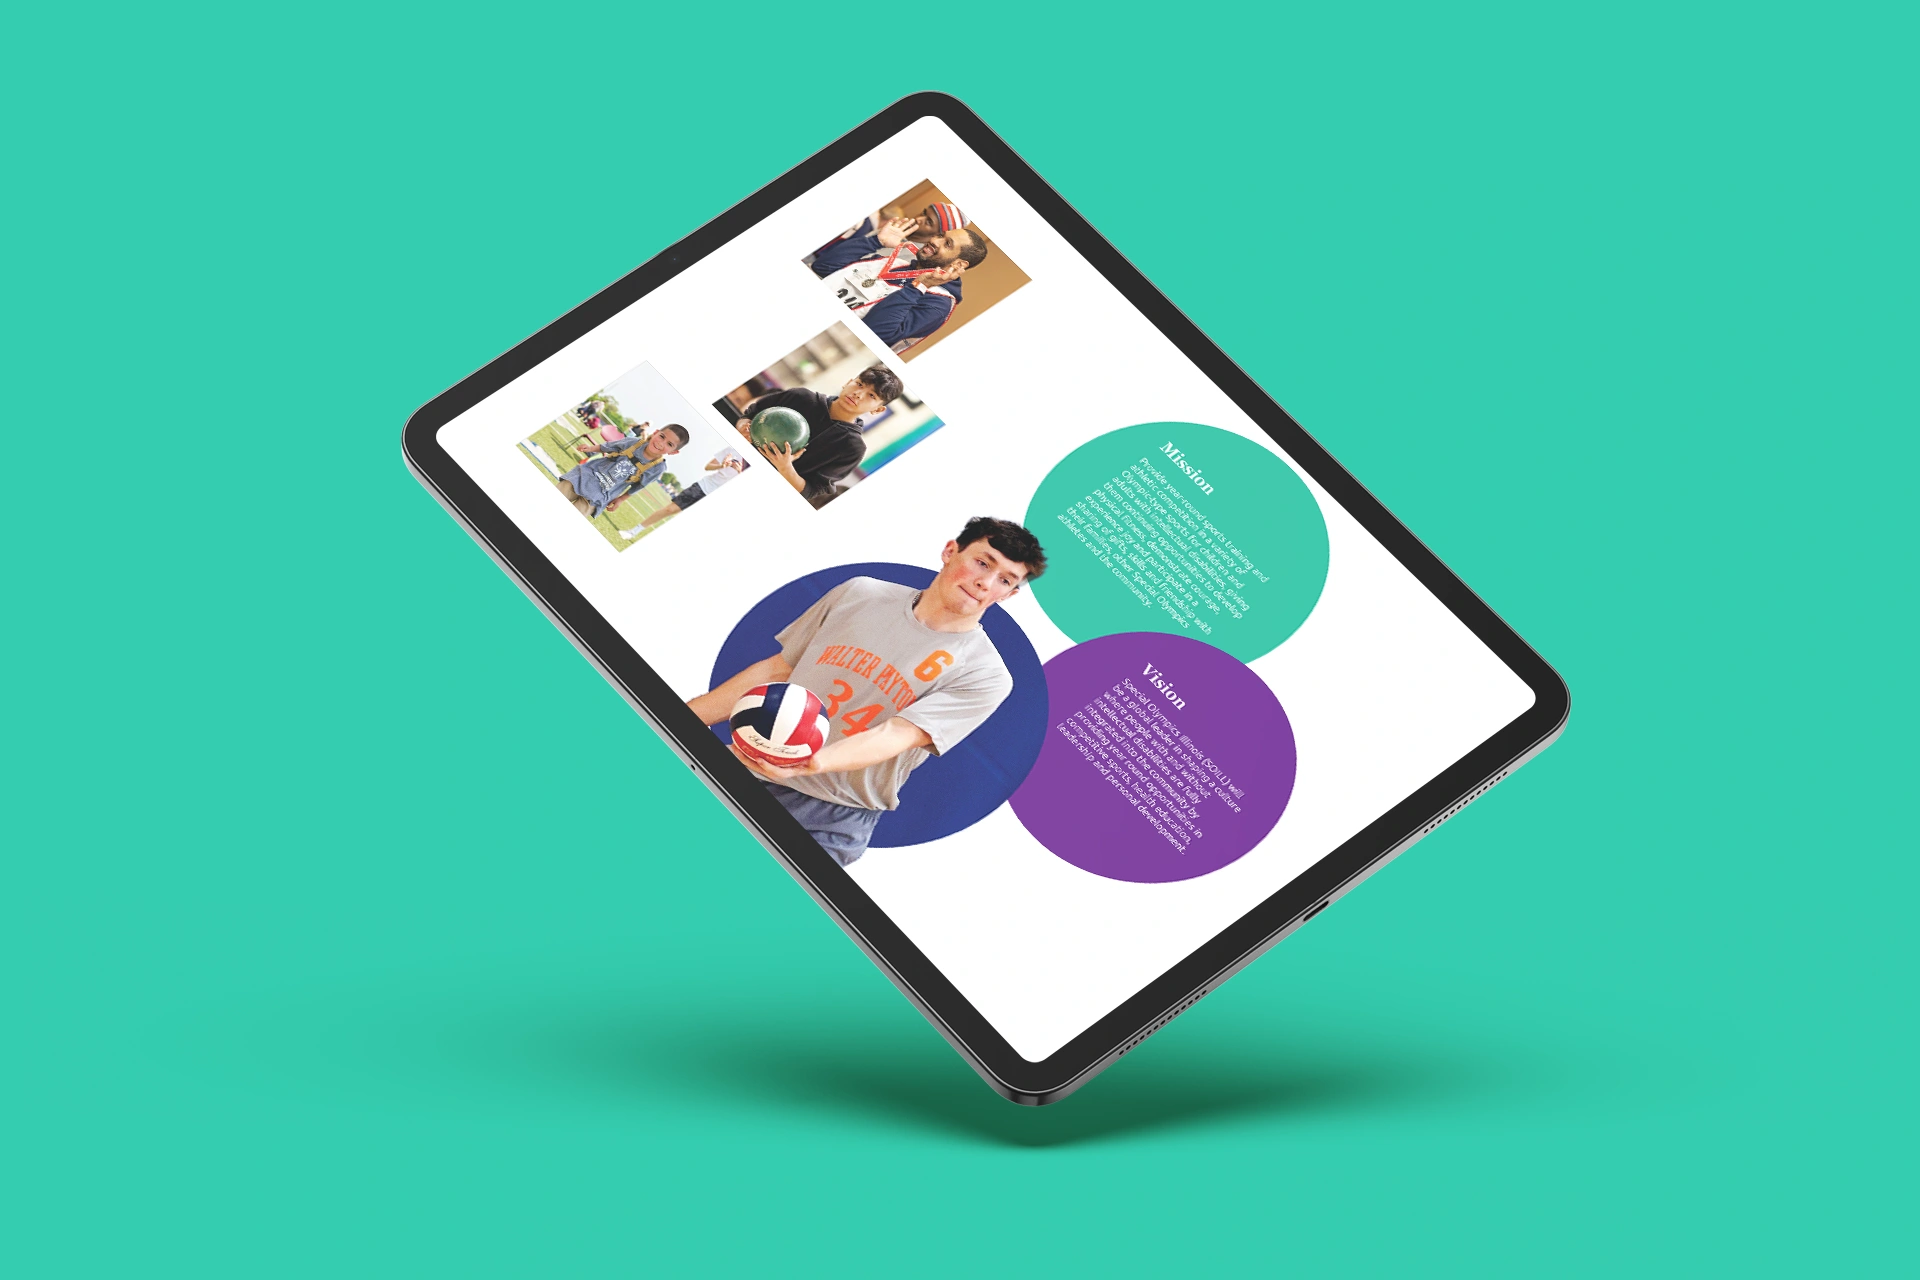 An annual report design displayed on a tablet device and designed for an organization dedicated to empower individuals with disabilities through sports.